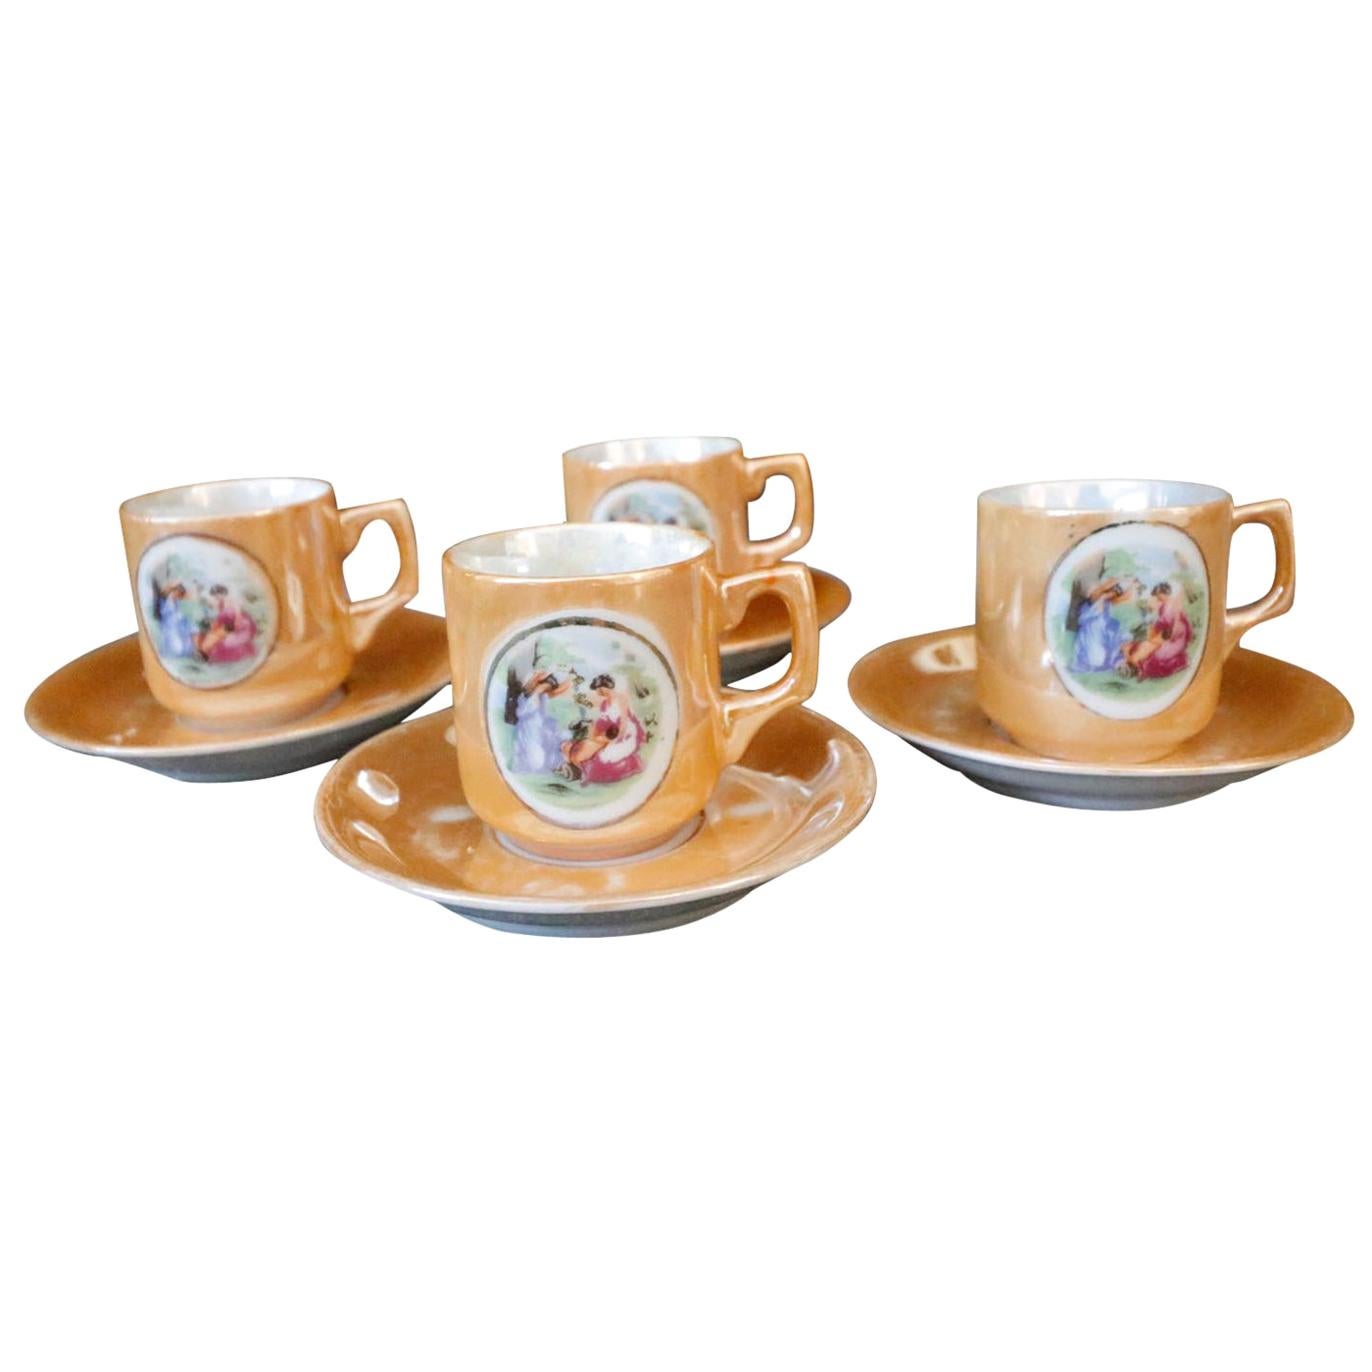 4 Petite Mother of Pearl Iridescence Hand Painted Tea Cups and Saucers For Sale